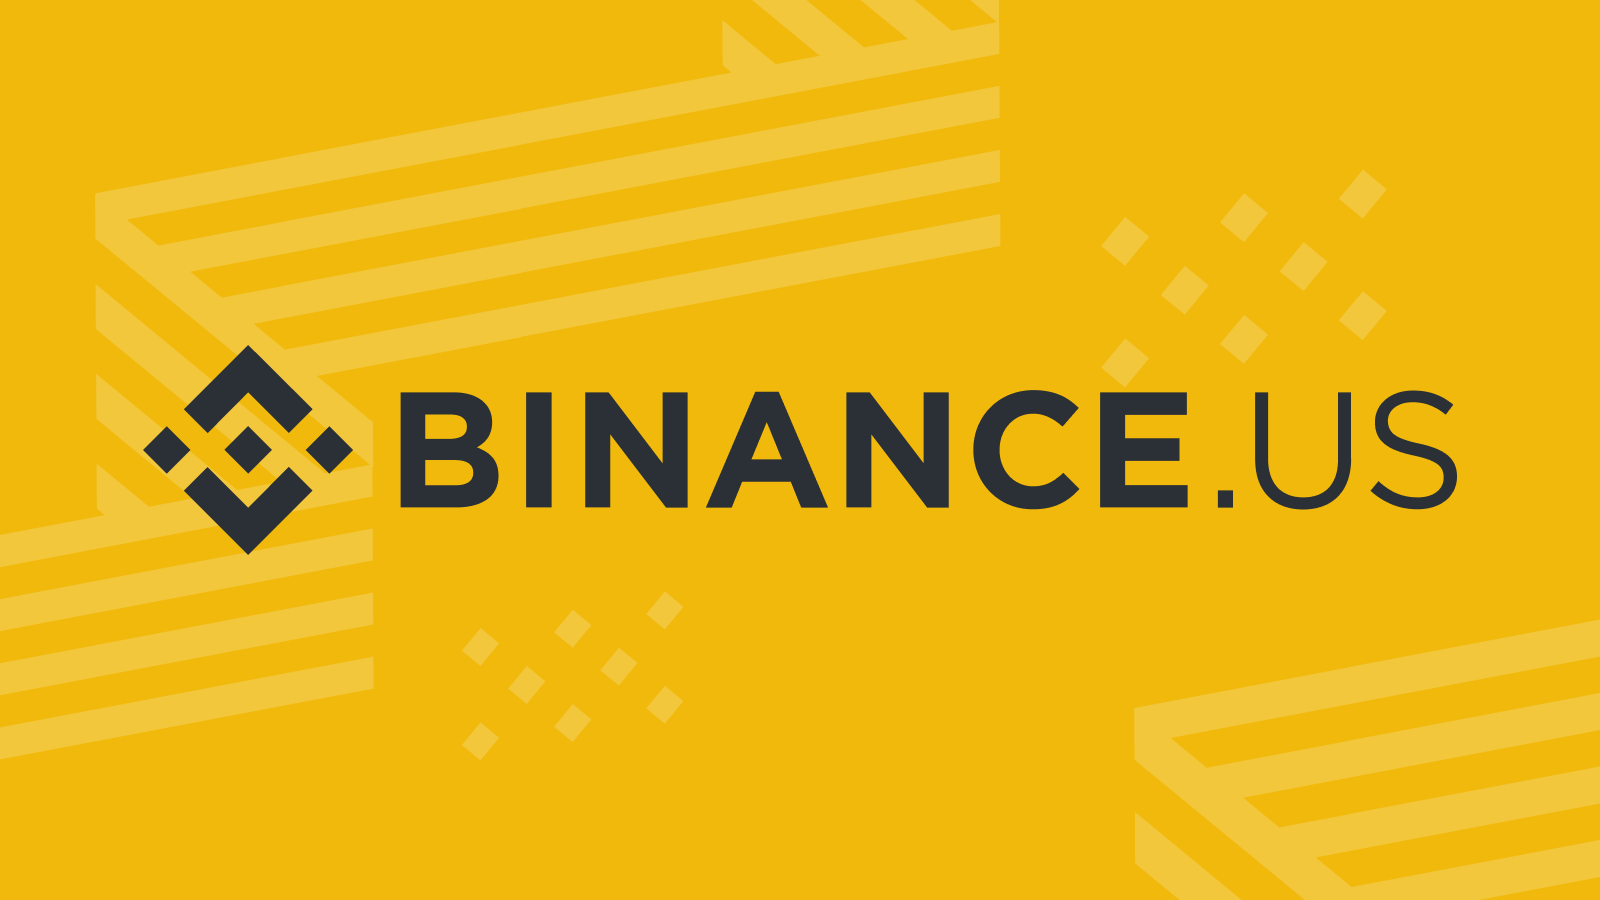 Voyager Announces Agreement for Binance.US to Acquire Its Assets